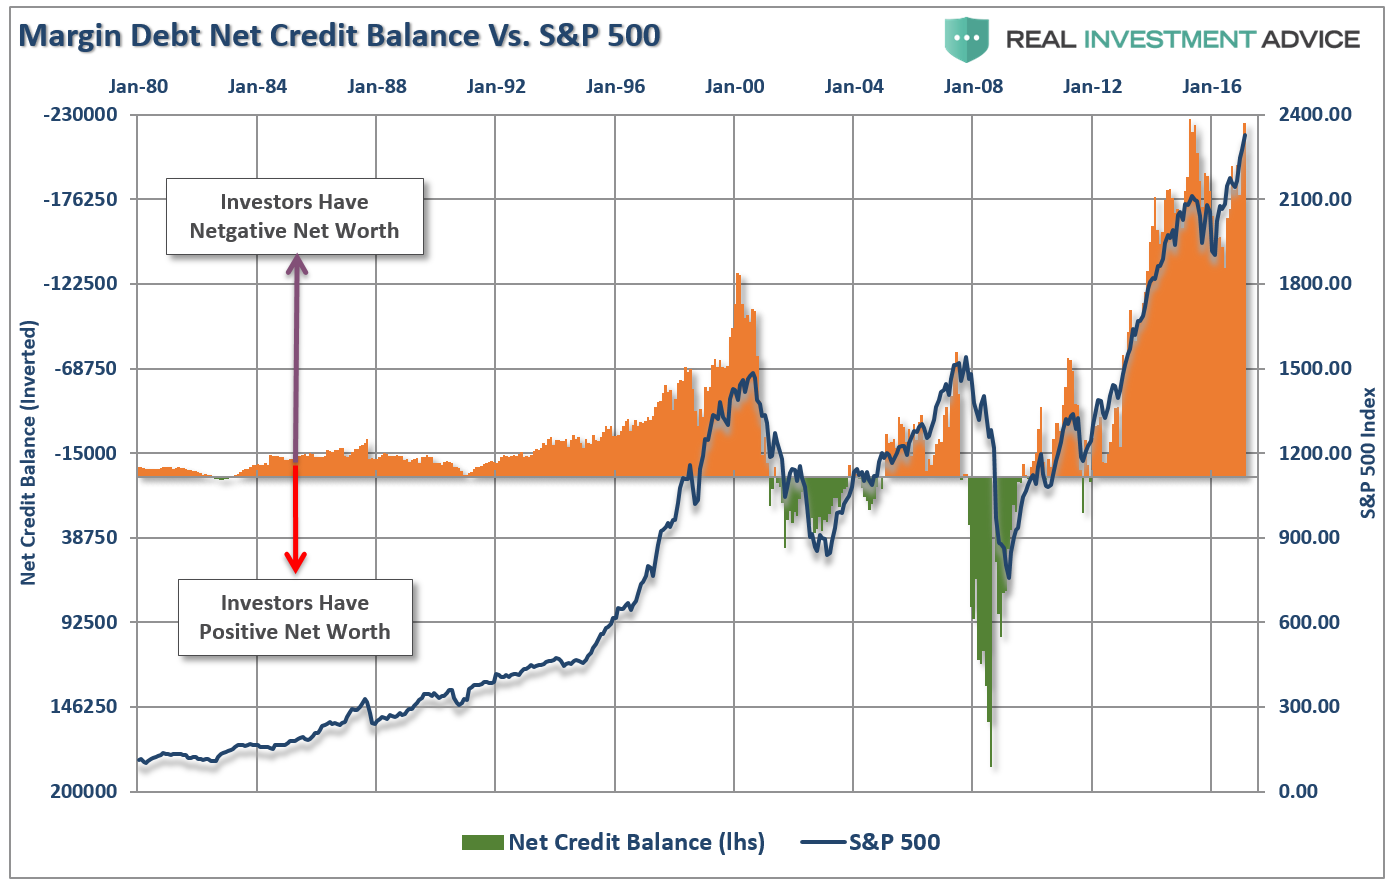 Debt And The S&P 500